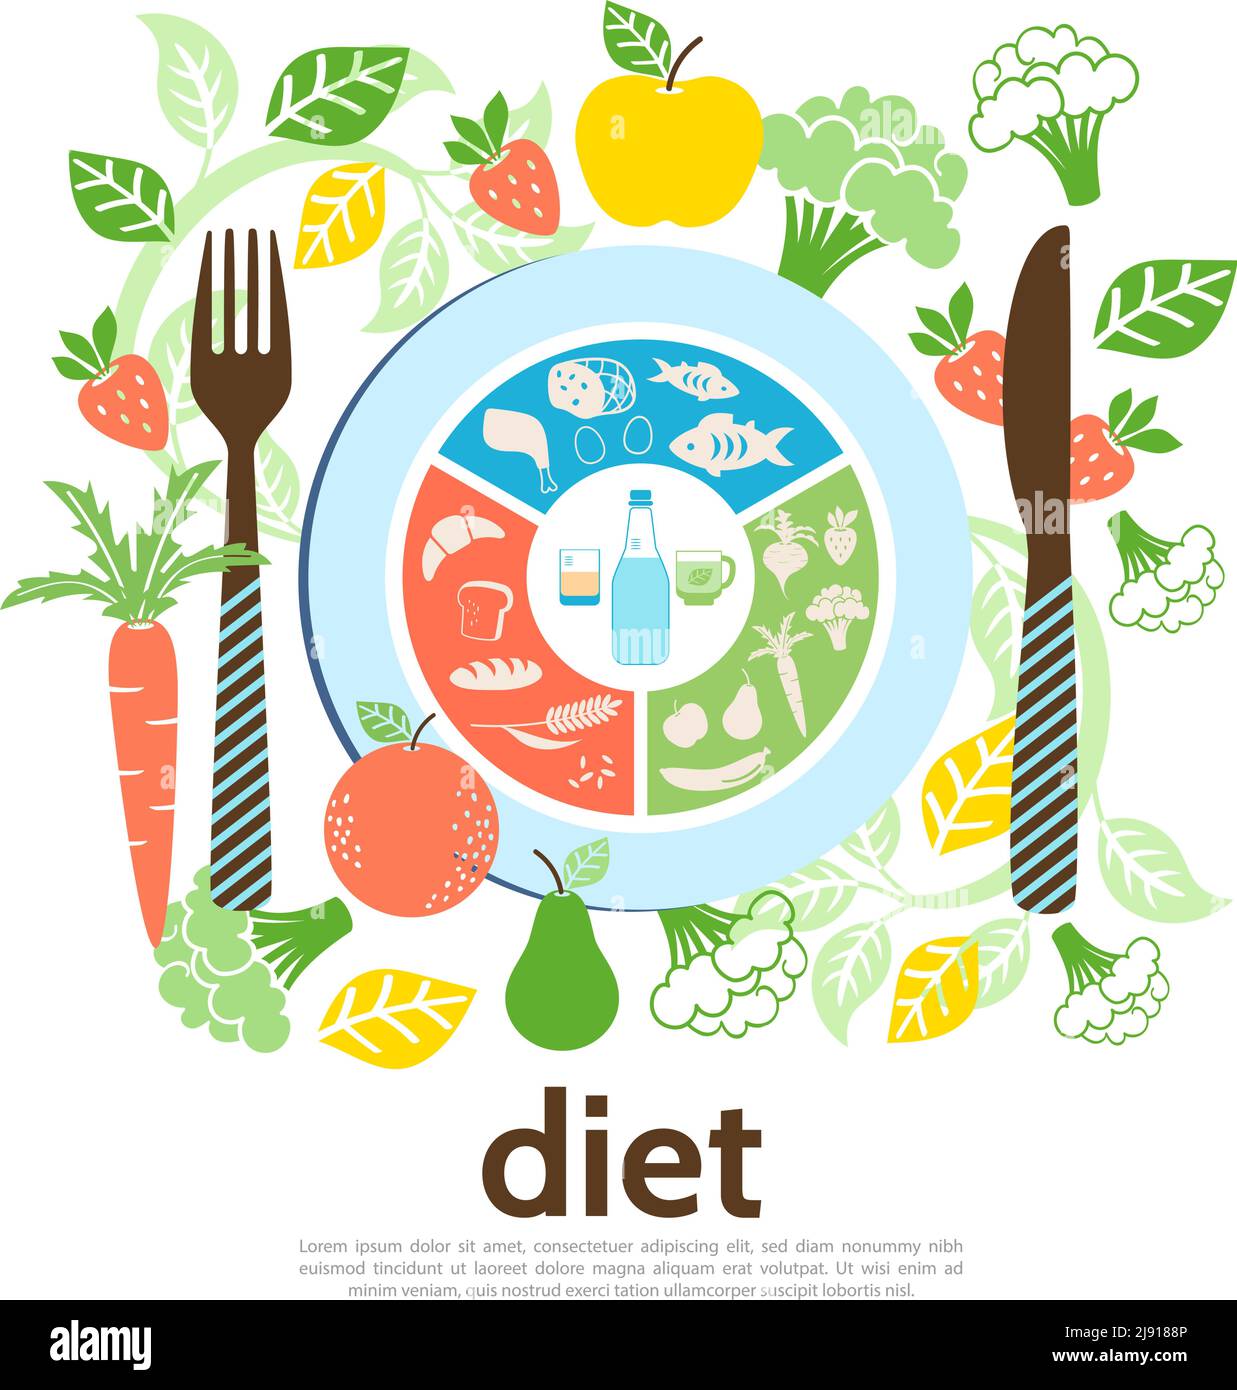 Flat diet template with peach pear apple carrot broccoli strawberry plate fork and knife vector illustration Stock Vector